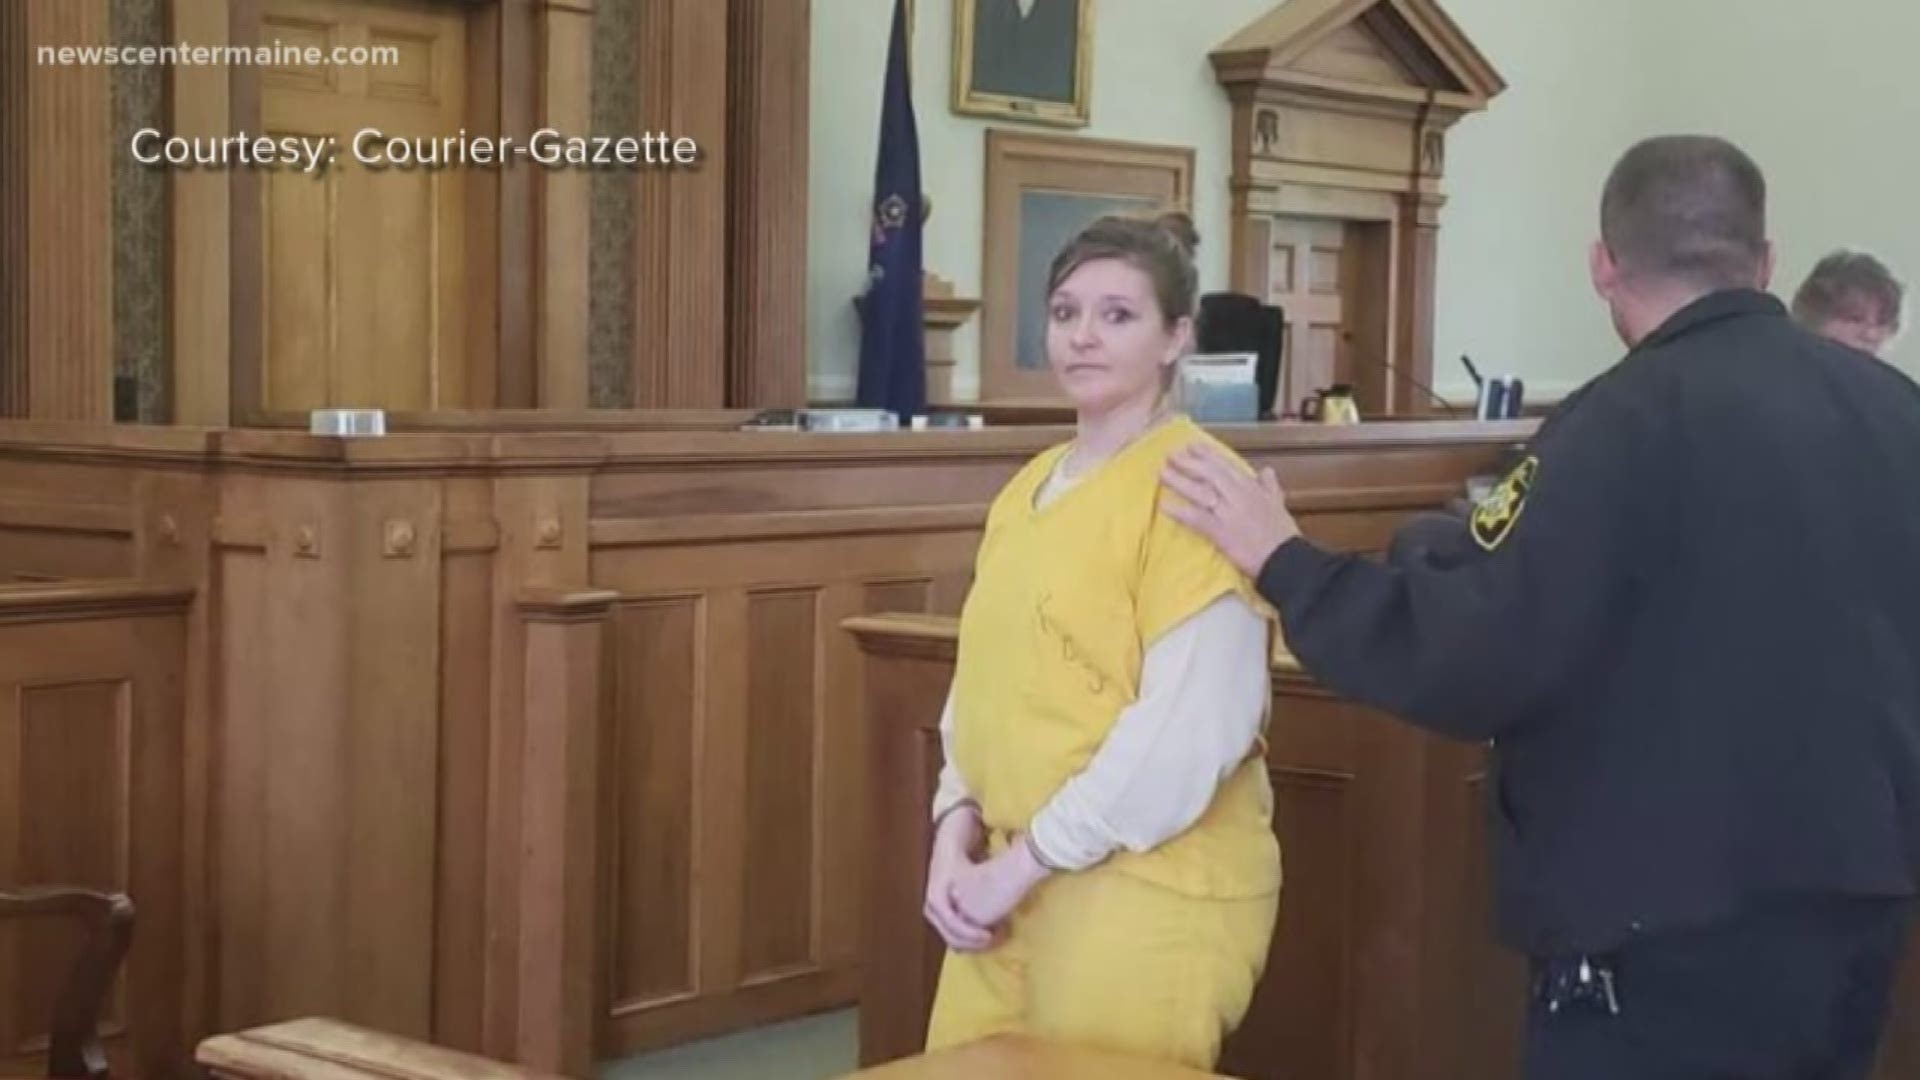 Sarah Richards of Owls Head entered a not guilty plea in a Rockland courtroom. Police say Richards beat and strangled Helen Carver in her own home. Carver reportedly hired Richards to shovel her driveway and do other odd jobs around the house.